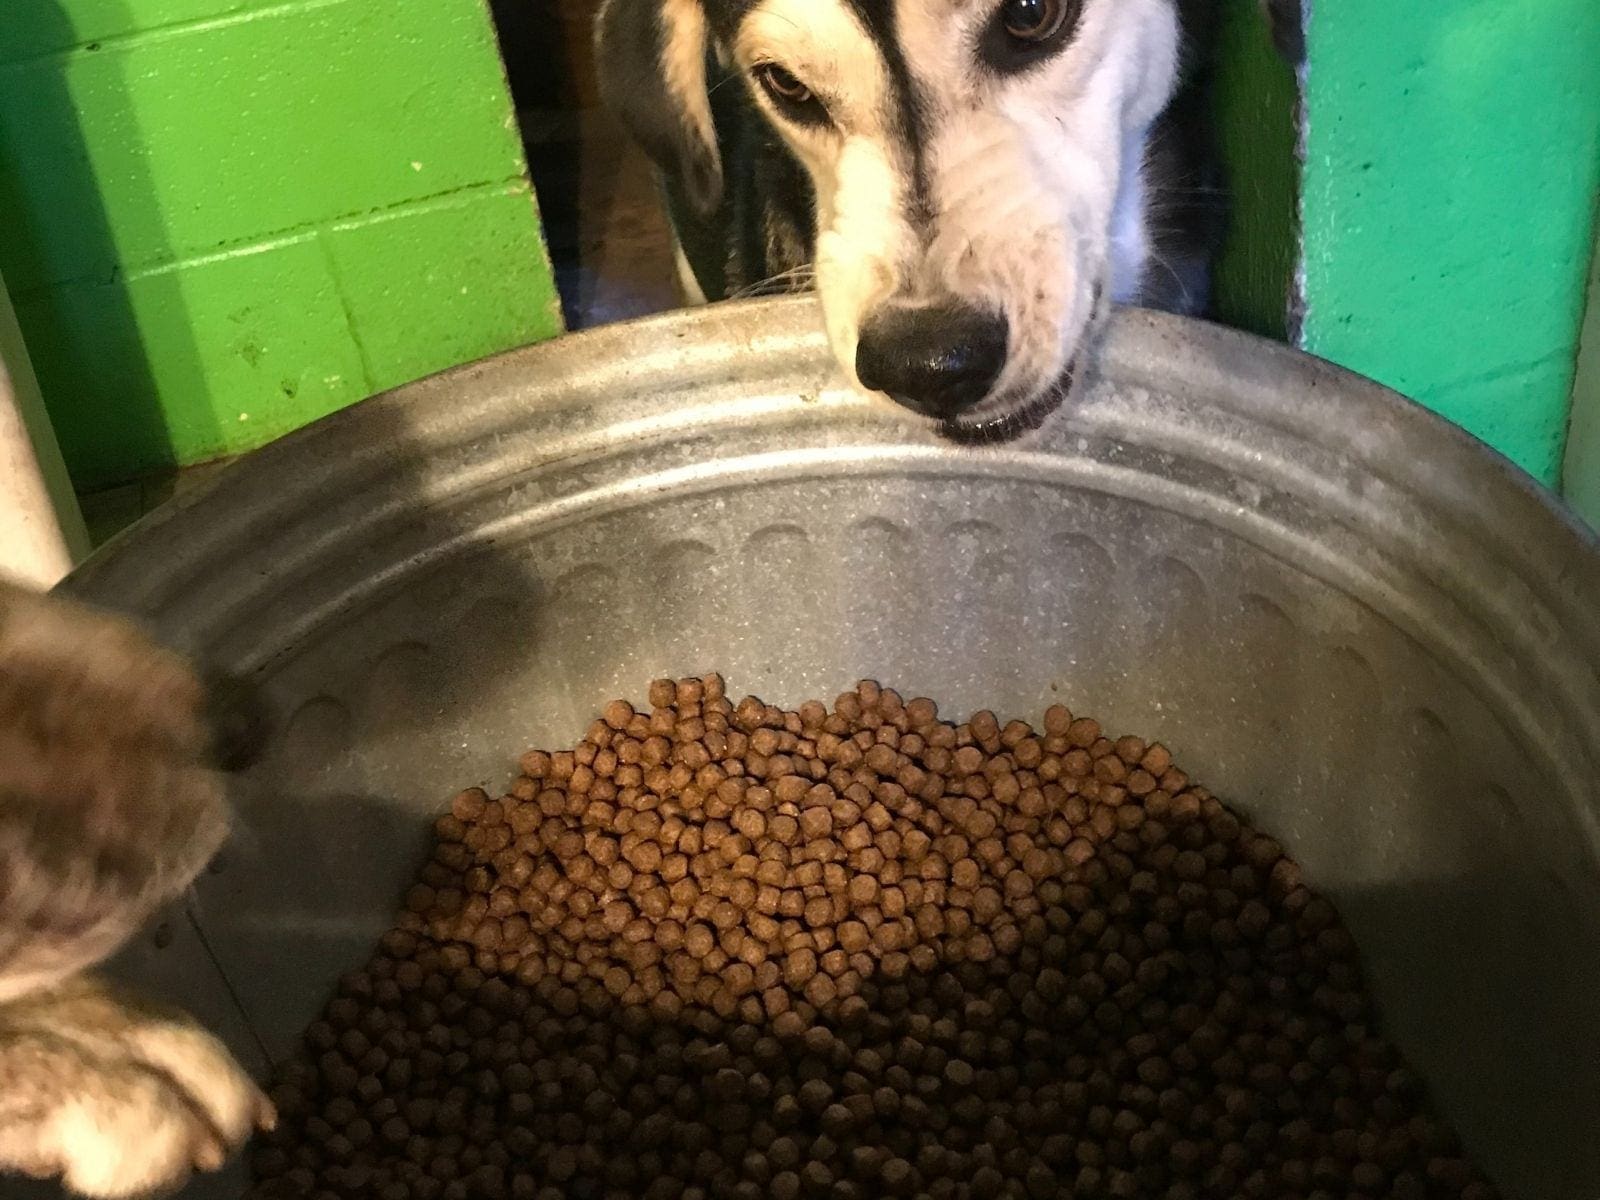 Husky "Jujubee" staring into contaminated pet food that killed 3 puppies